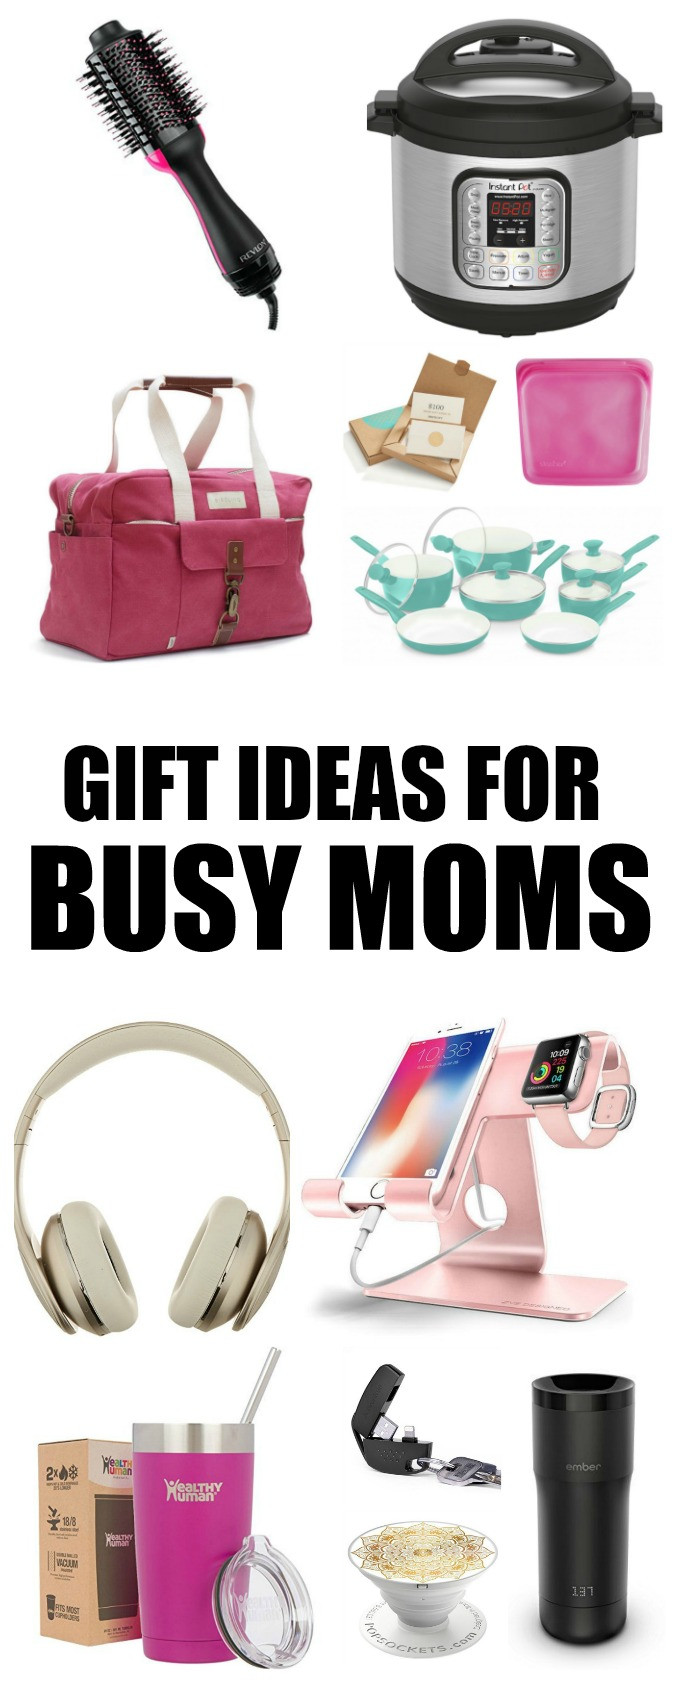 Holiday Gift Ideas Moms
 Gift Ideas For Busy Moms